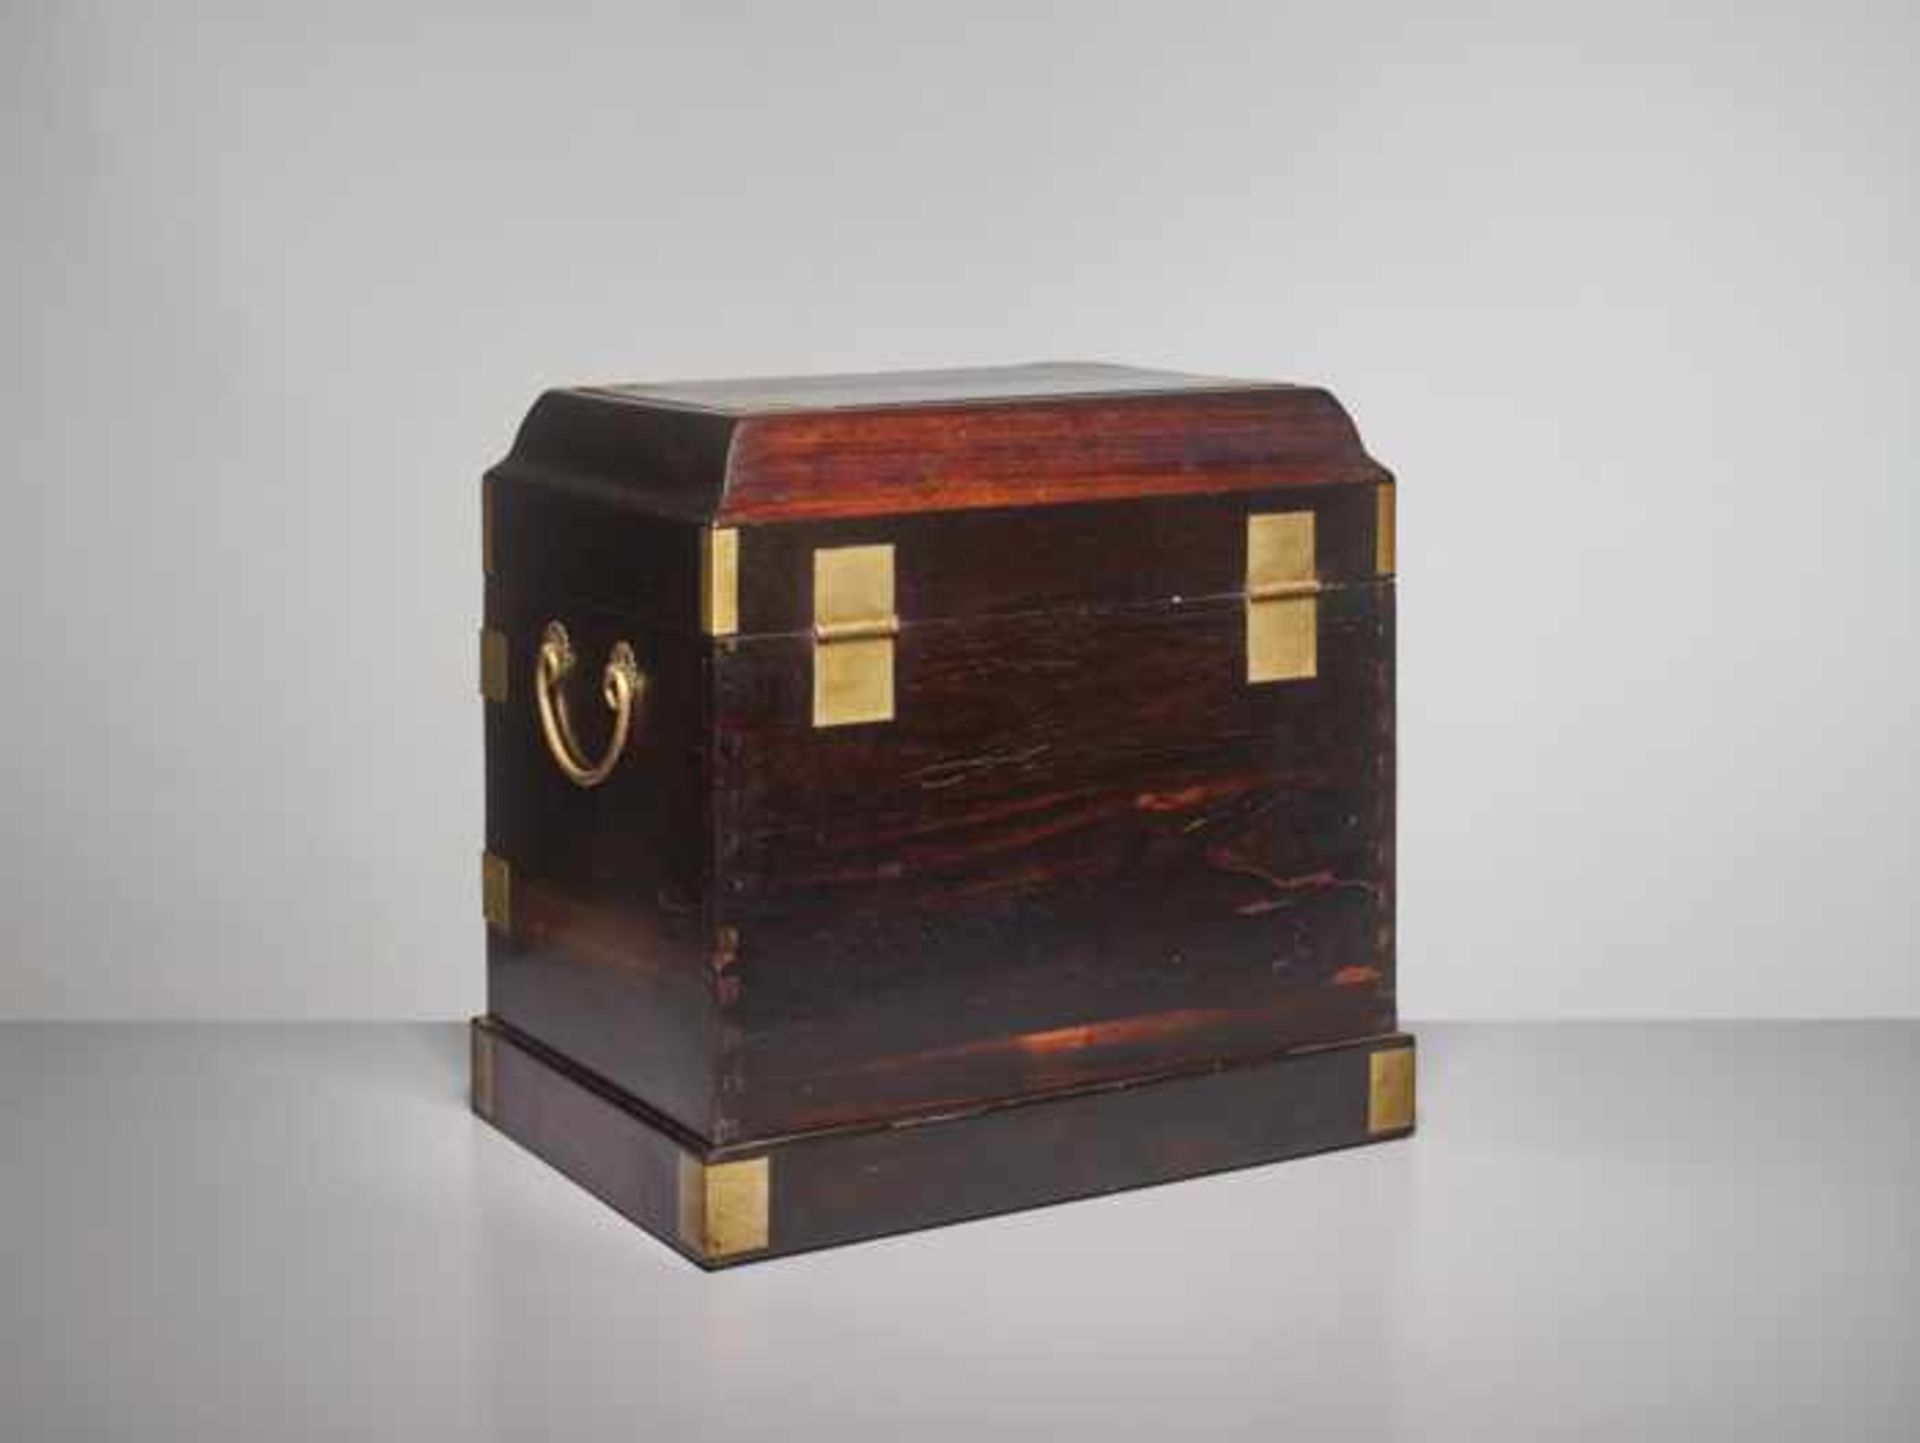 A LARGE ZITAN PORTABLE CHEST, GUANPIXIANG Dark brown ‘Zitan’ wood, brass fittings. China, 18th - Image 4 of 7